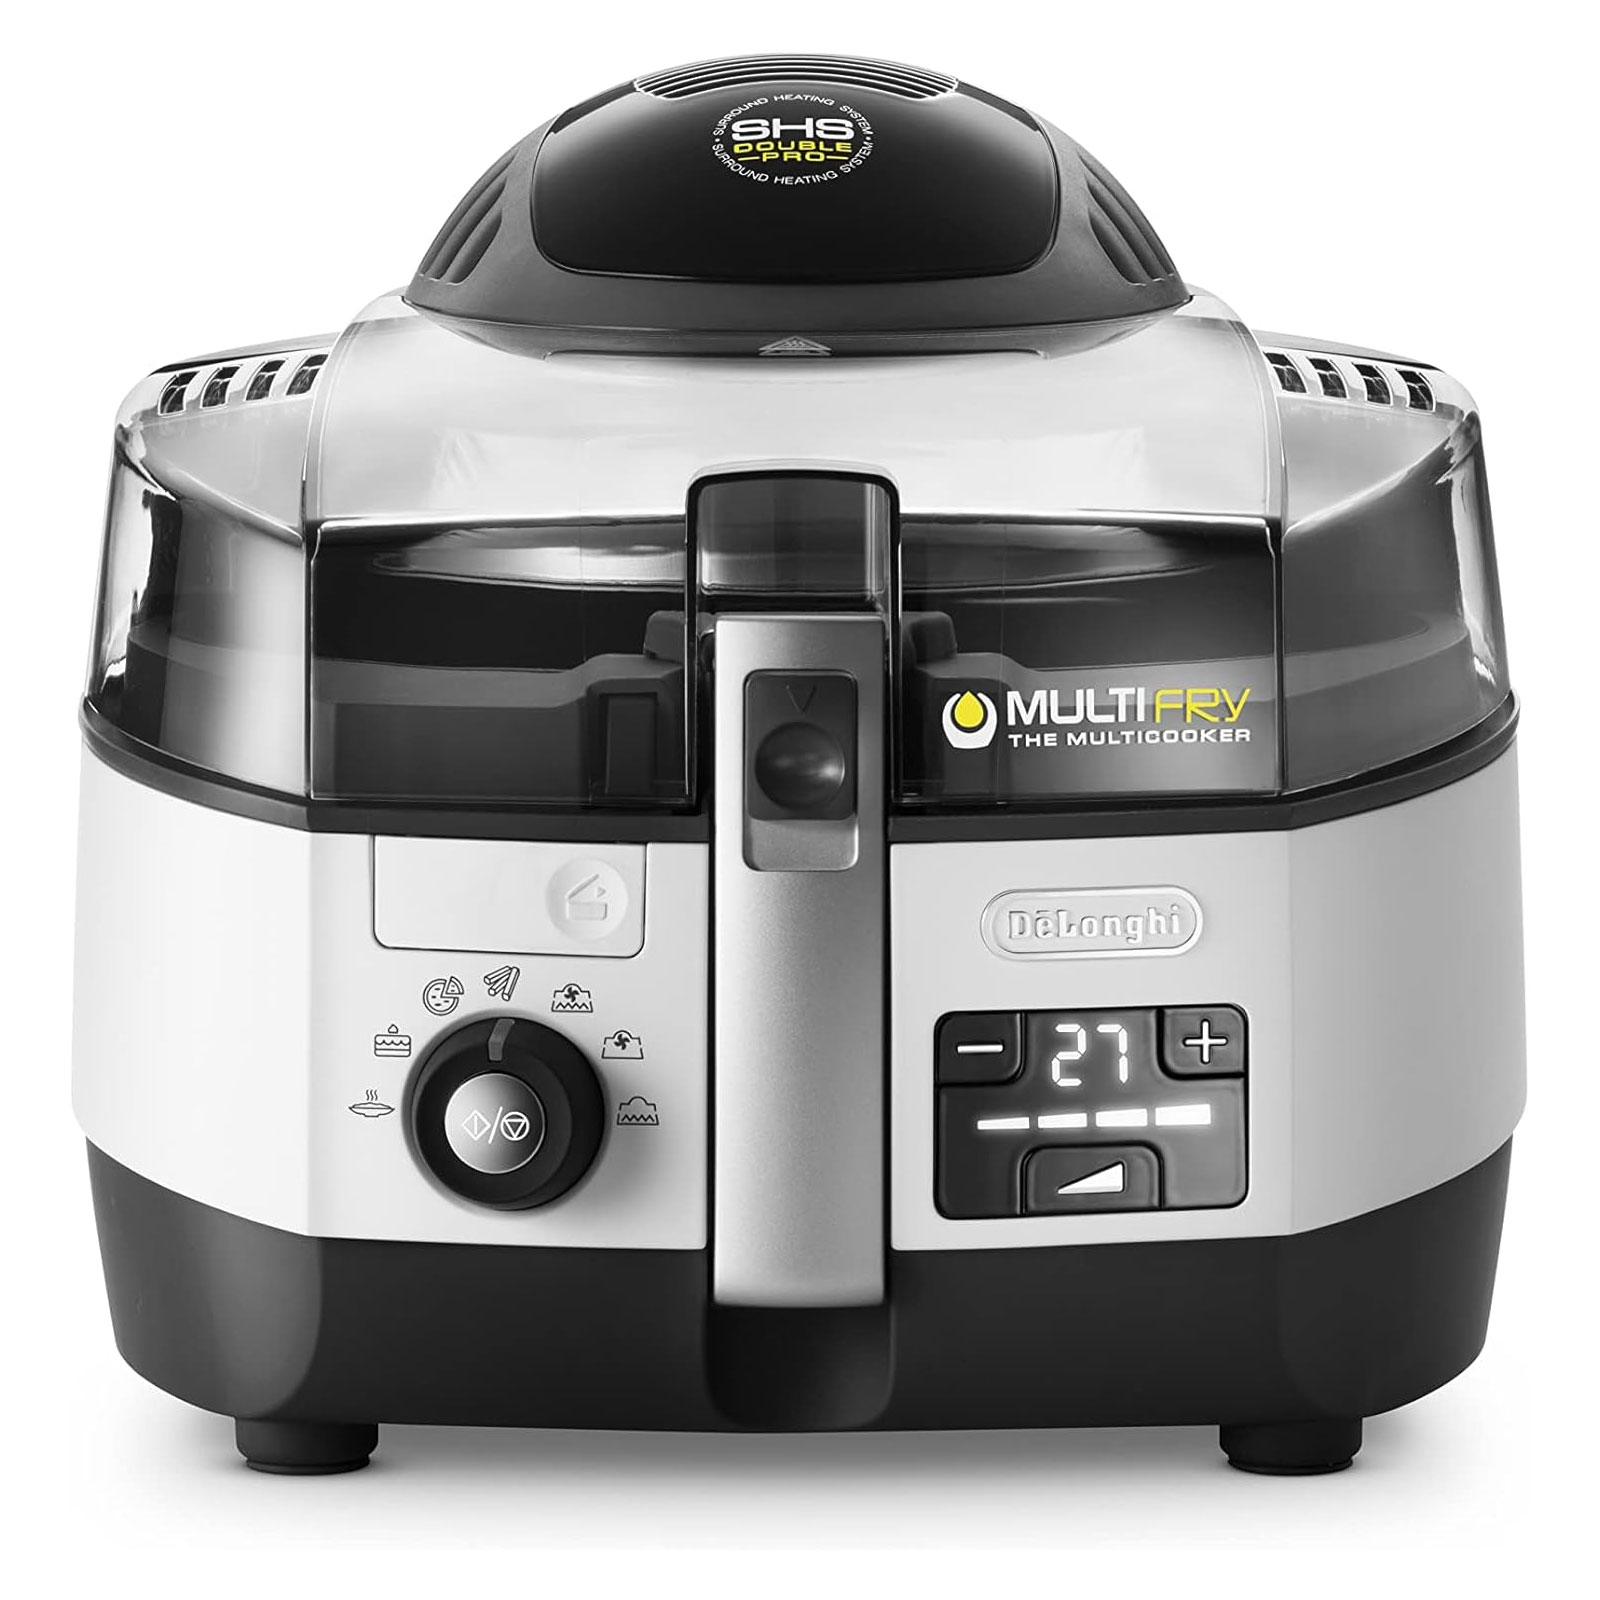 DeLonghi FH 1396/1 Extra Chef Plus Fritteuse